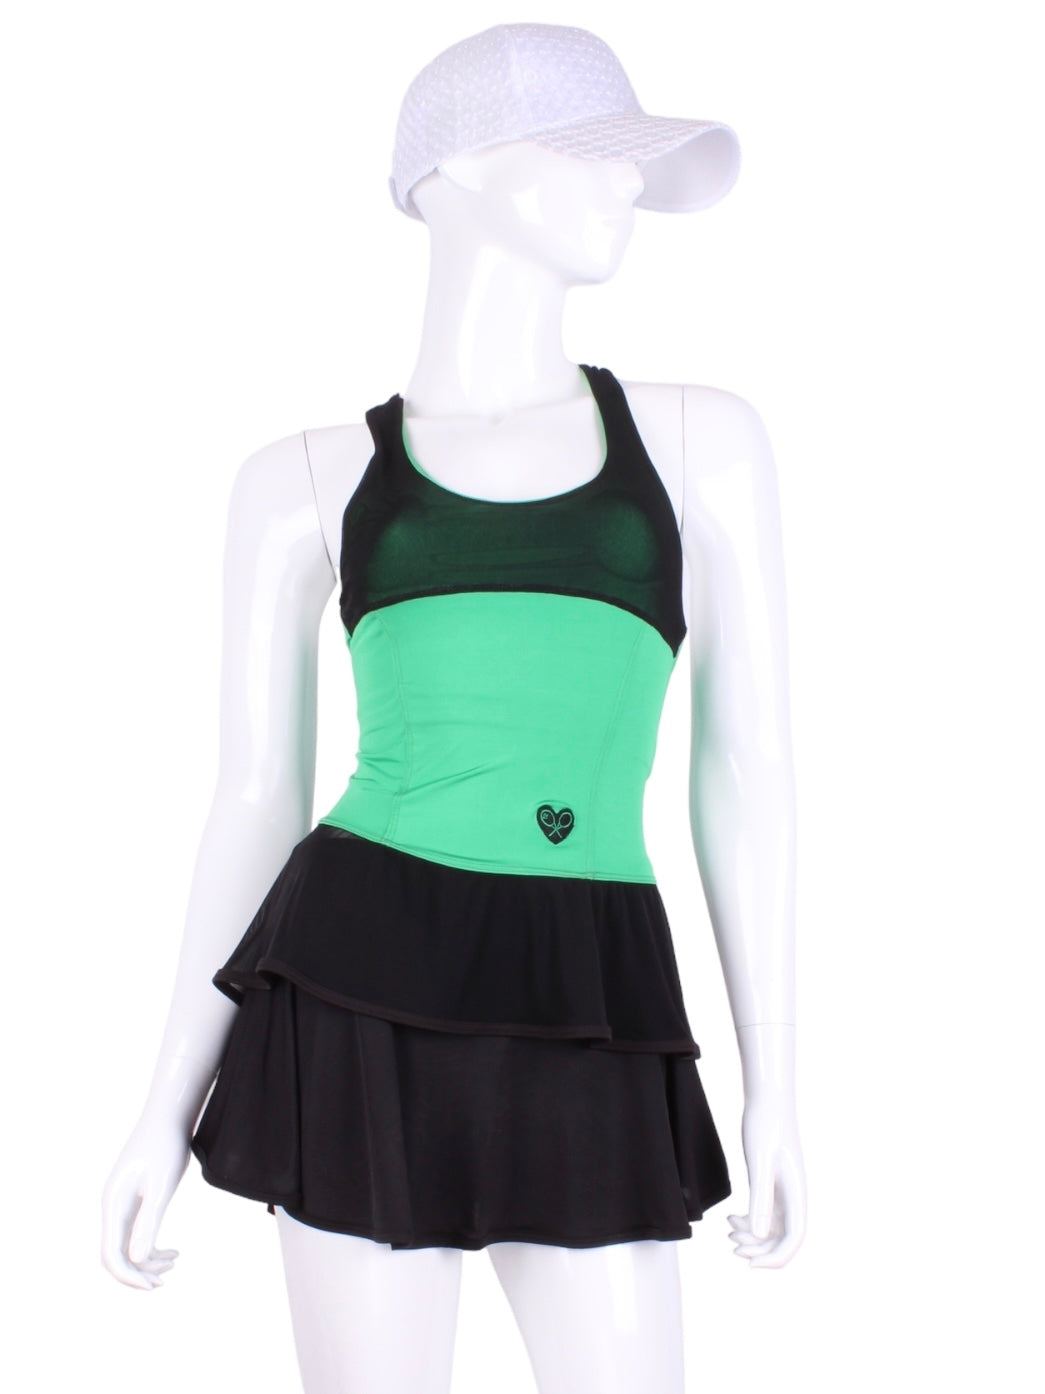 Ruffle Tank Tennis Top Green & Black Mesh. An elegant tennis ruffle top - silky soft - light - and quick-drying breathable fabric.   Scoop neckline front and crossed back with two-needle cover stitch at each seam.   Smooth binding finishes the edges with class.  The most comfortable and feminine tennis top.  These pieces run small for a more petite woman - under 5’8” - for the medium max 34 D